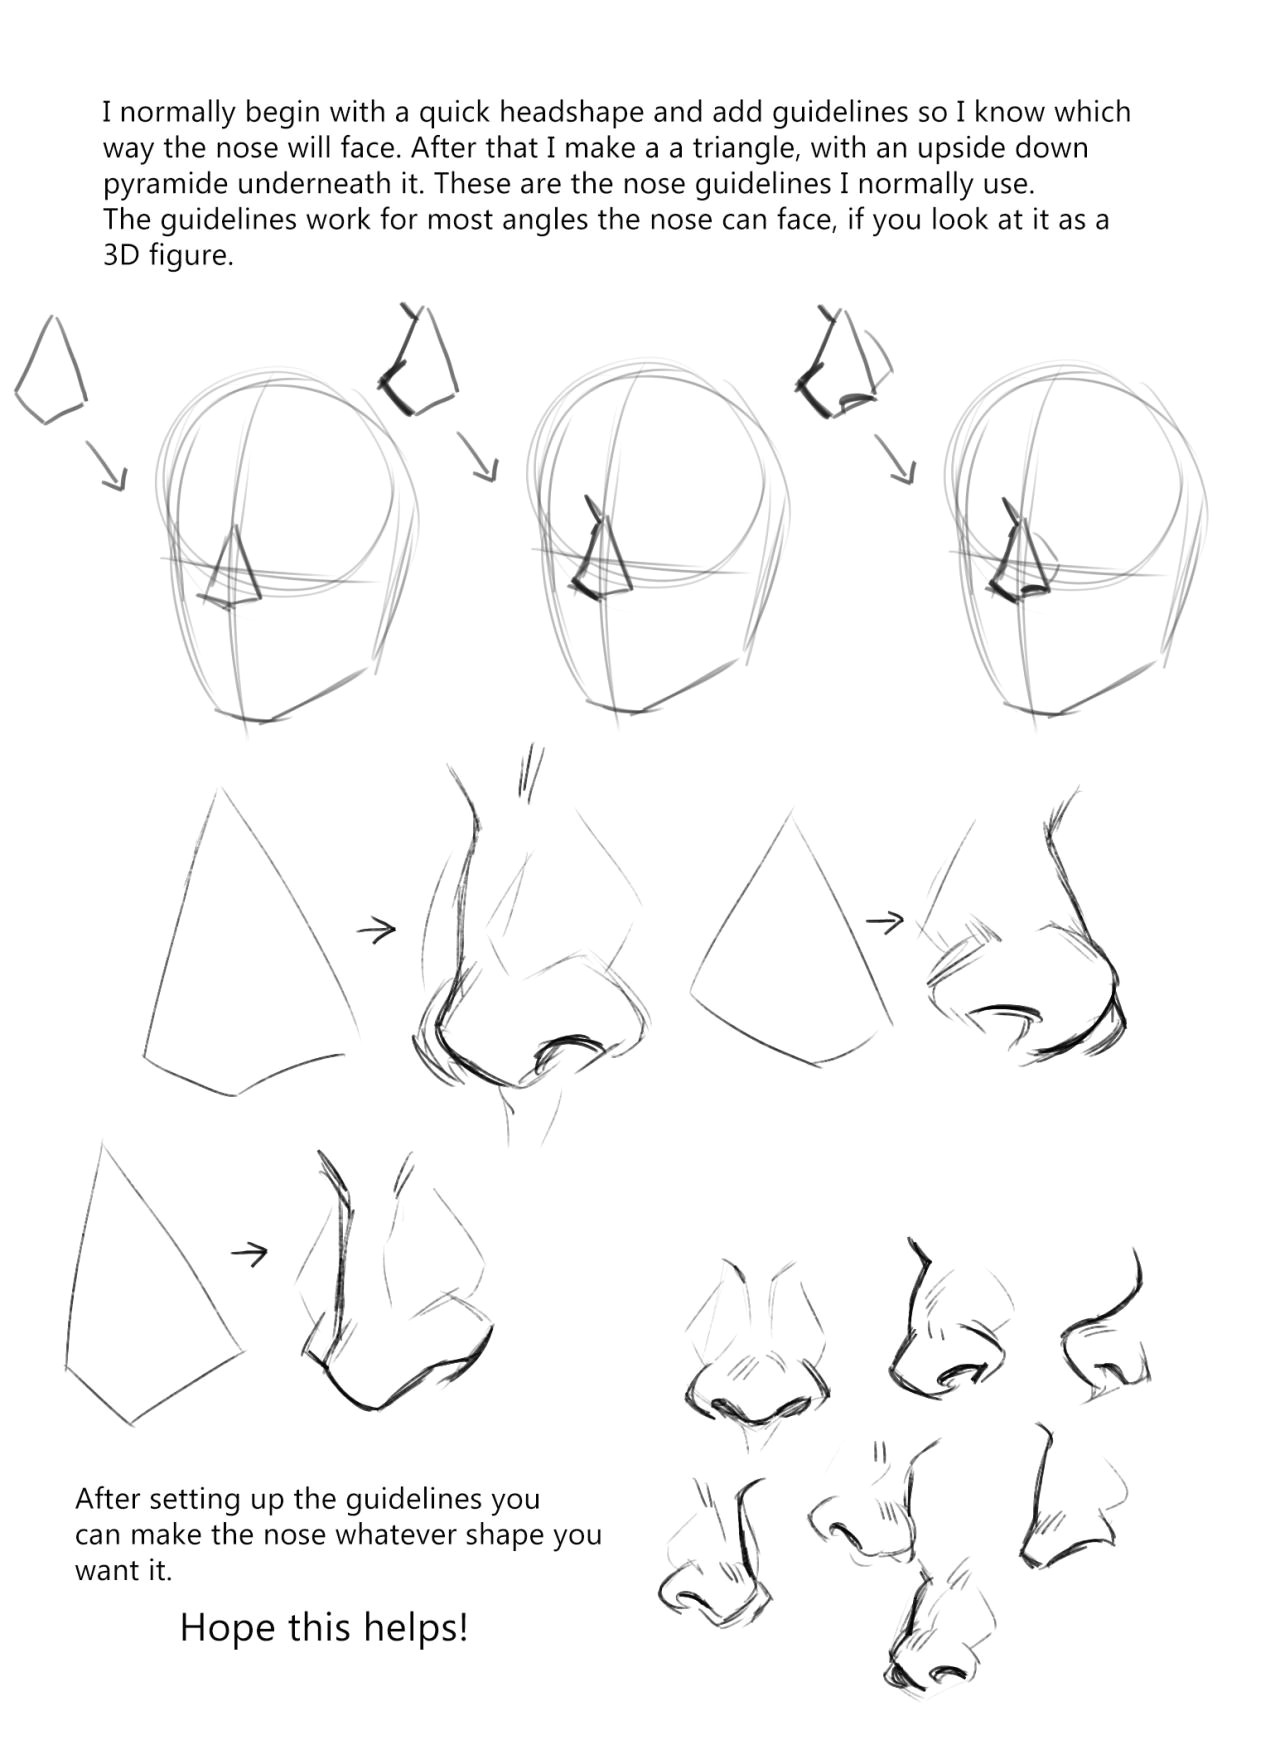 Easy Way to Draw A Nose Cccrystalclear some People Requested A Nose Tutorial some